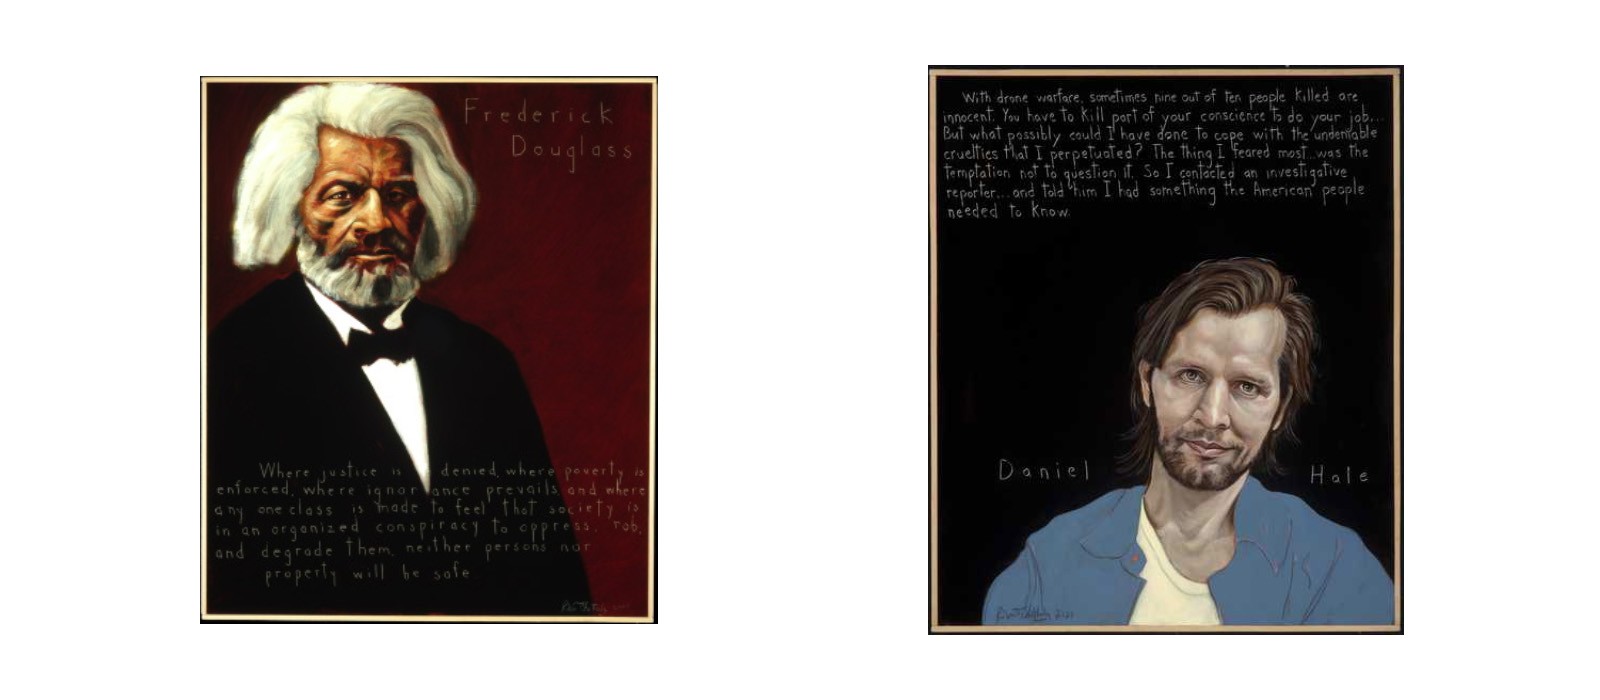 Paintings of Frederick Douglass and Daniel Hale